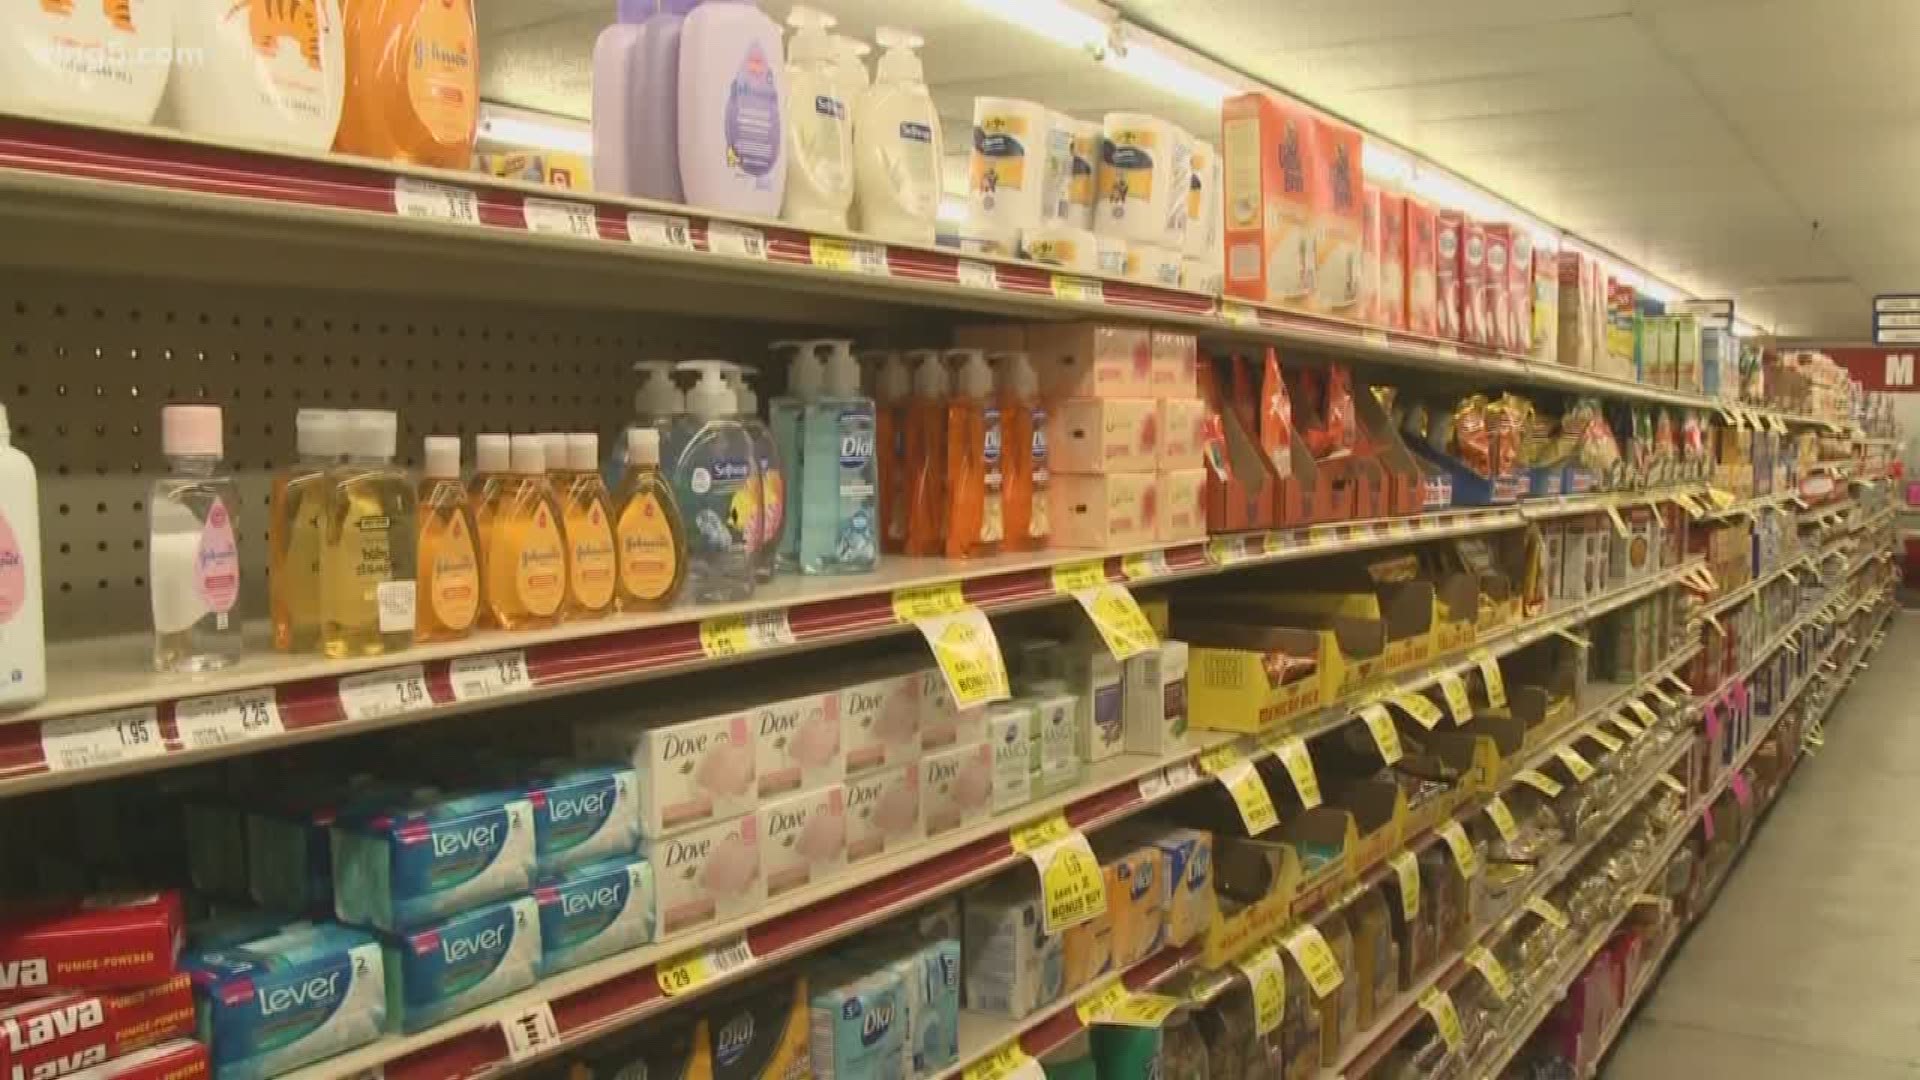 Washington Attorney General Bob Ferguson wants consumers to report any cases they see of price gouging on hand sanitizer, disinfectant wipes, etc.